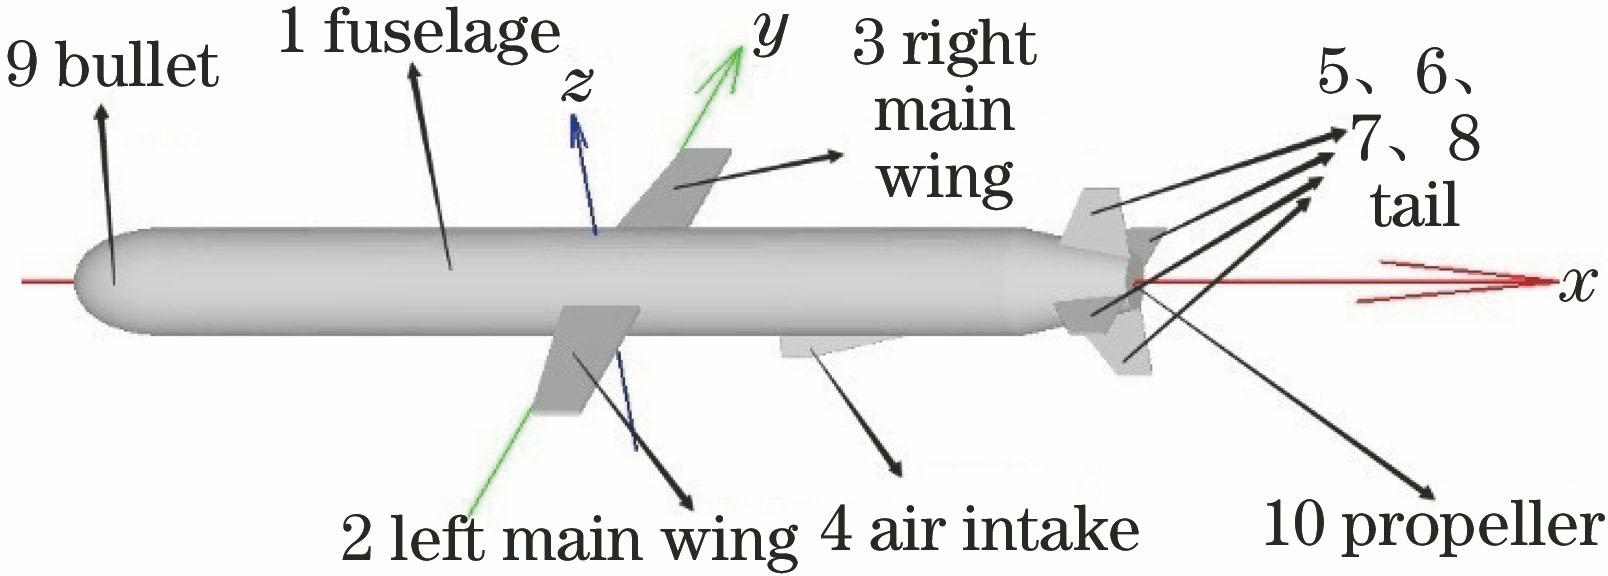 Schematic of parts of cruise missile